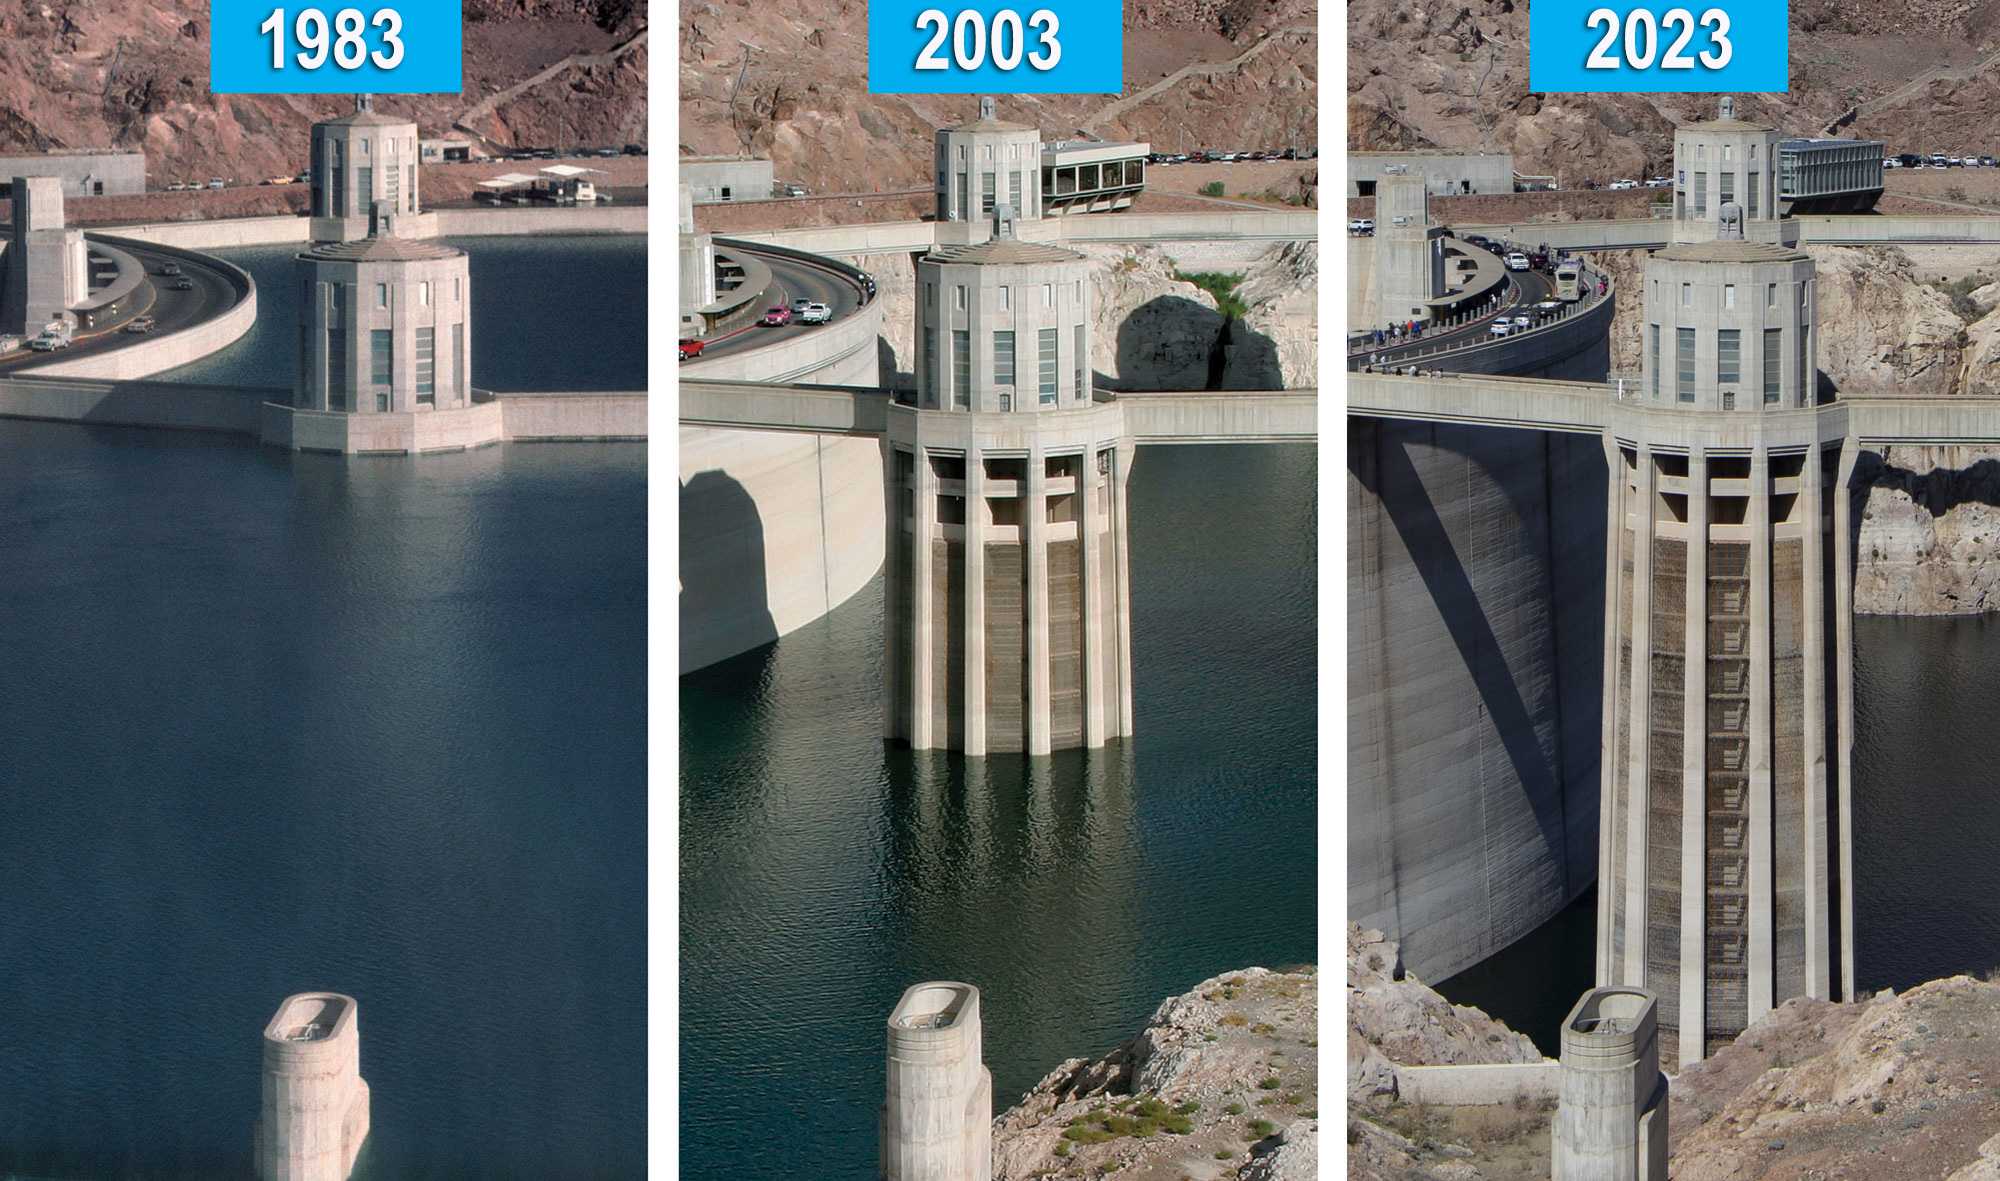 Photos from 1983, 2003 and 2023 show water level decline at the spillways at Hoover Dam